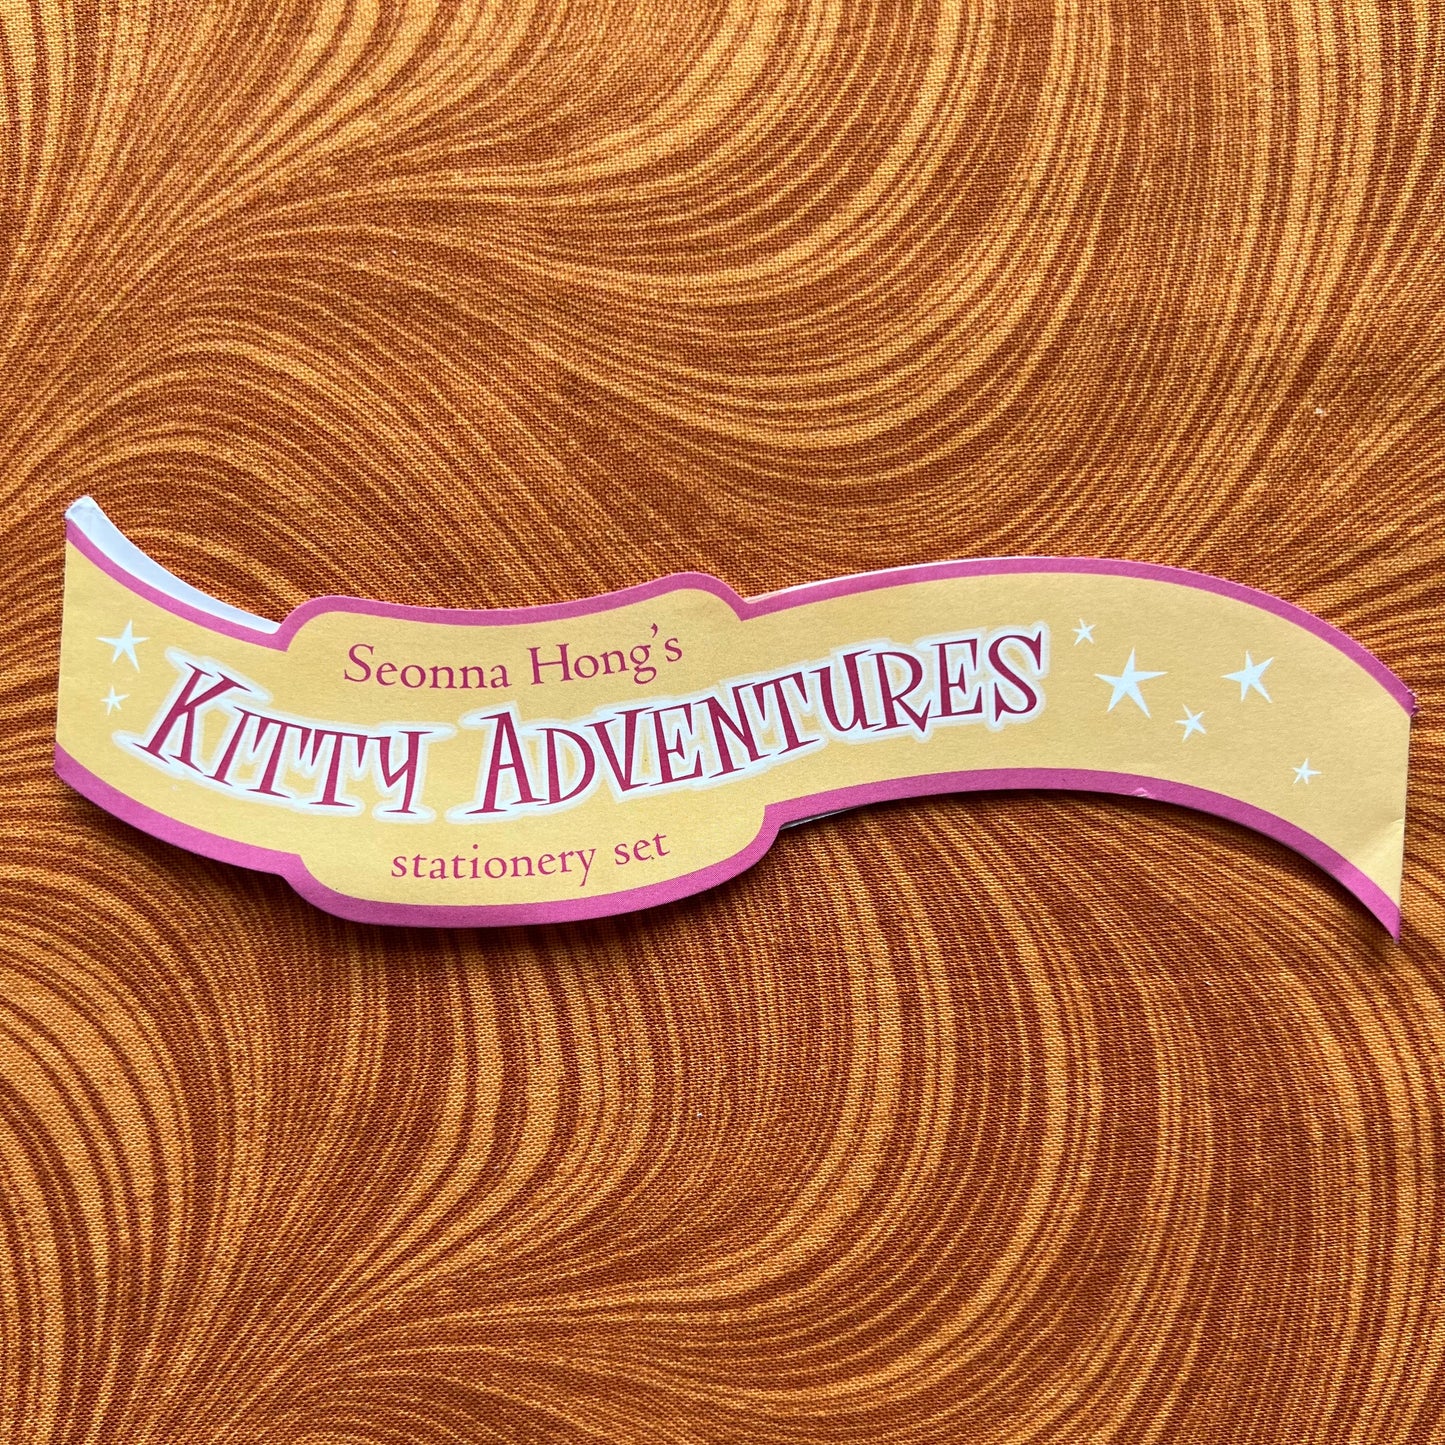 Seonna Hong's "Kitty Adventures" Stationery Set- Dark Horse Deluxe- Stationery Exotique